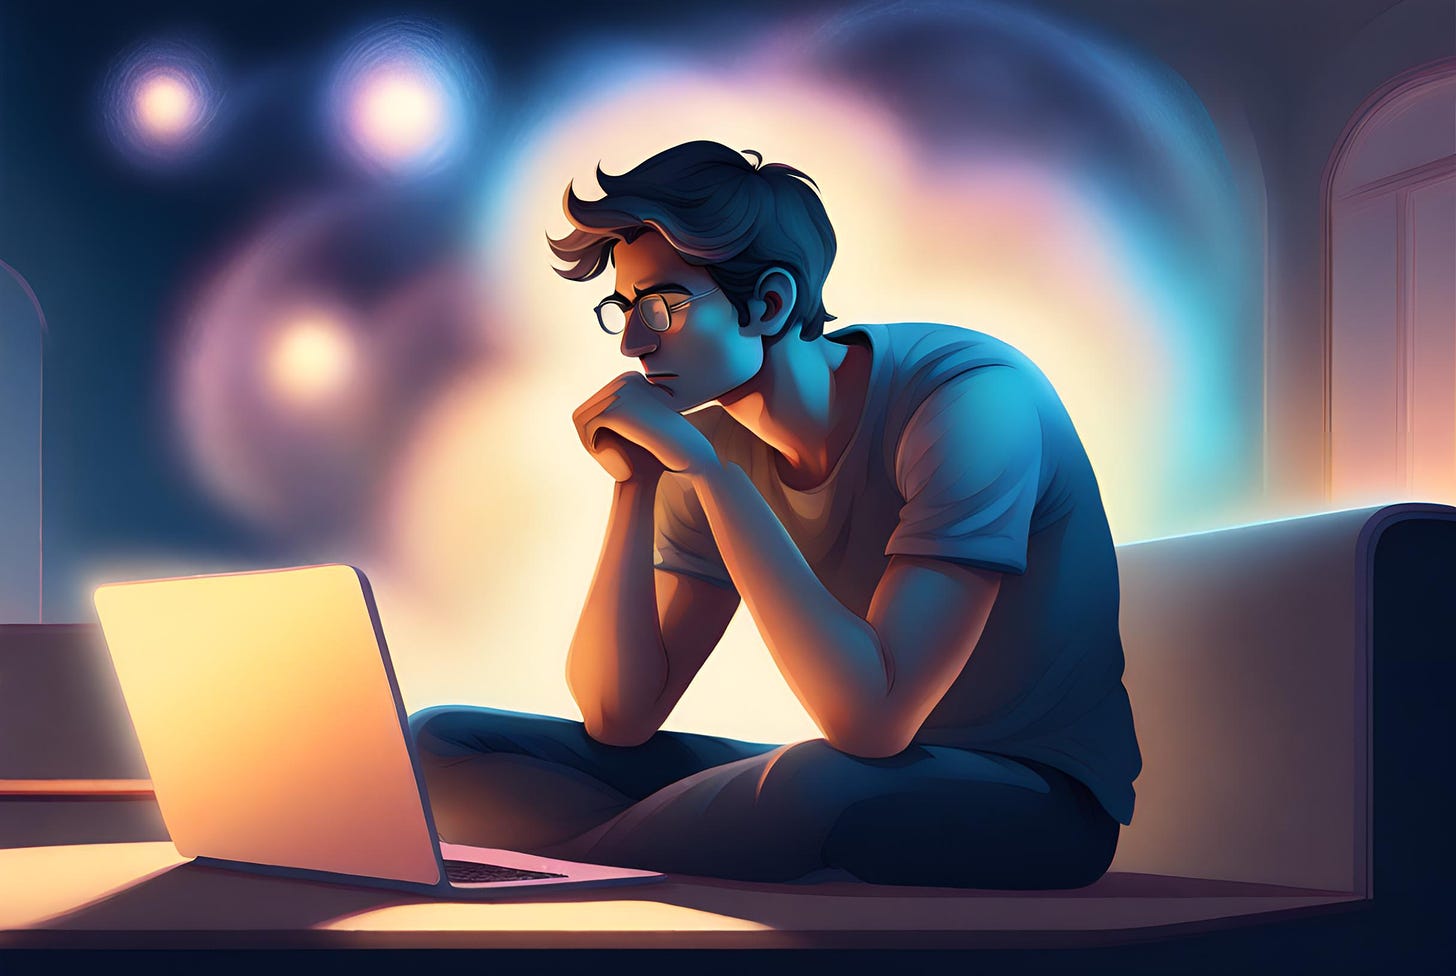 Illustration of a thinking man sitting in front of a laptop computer